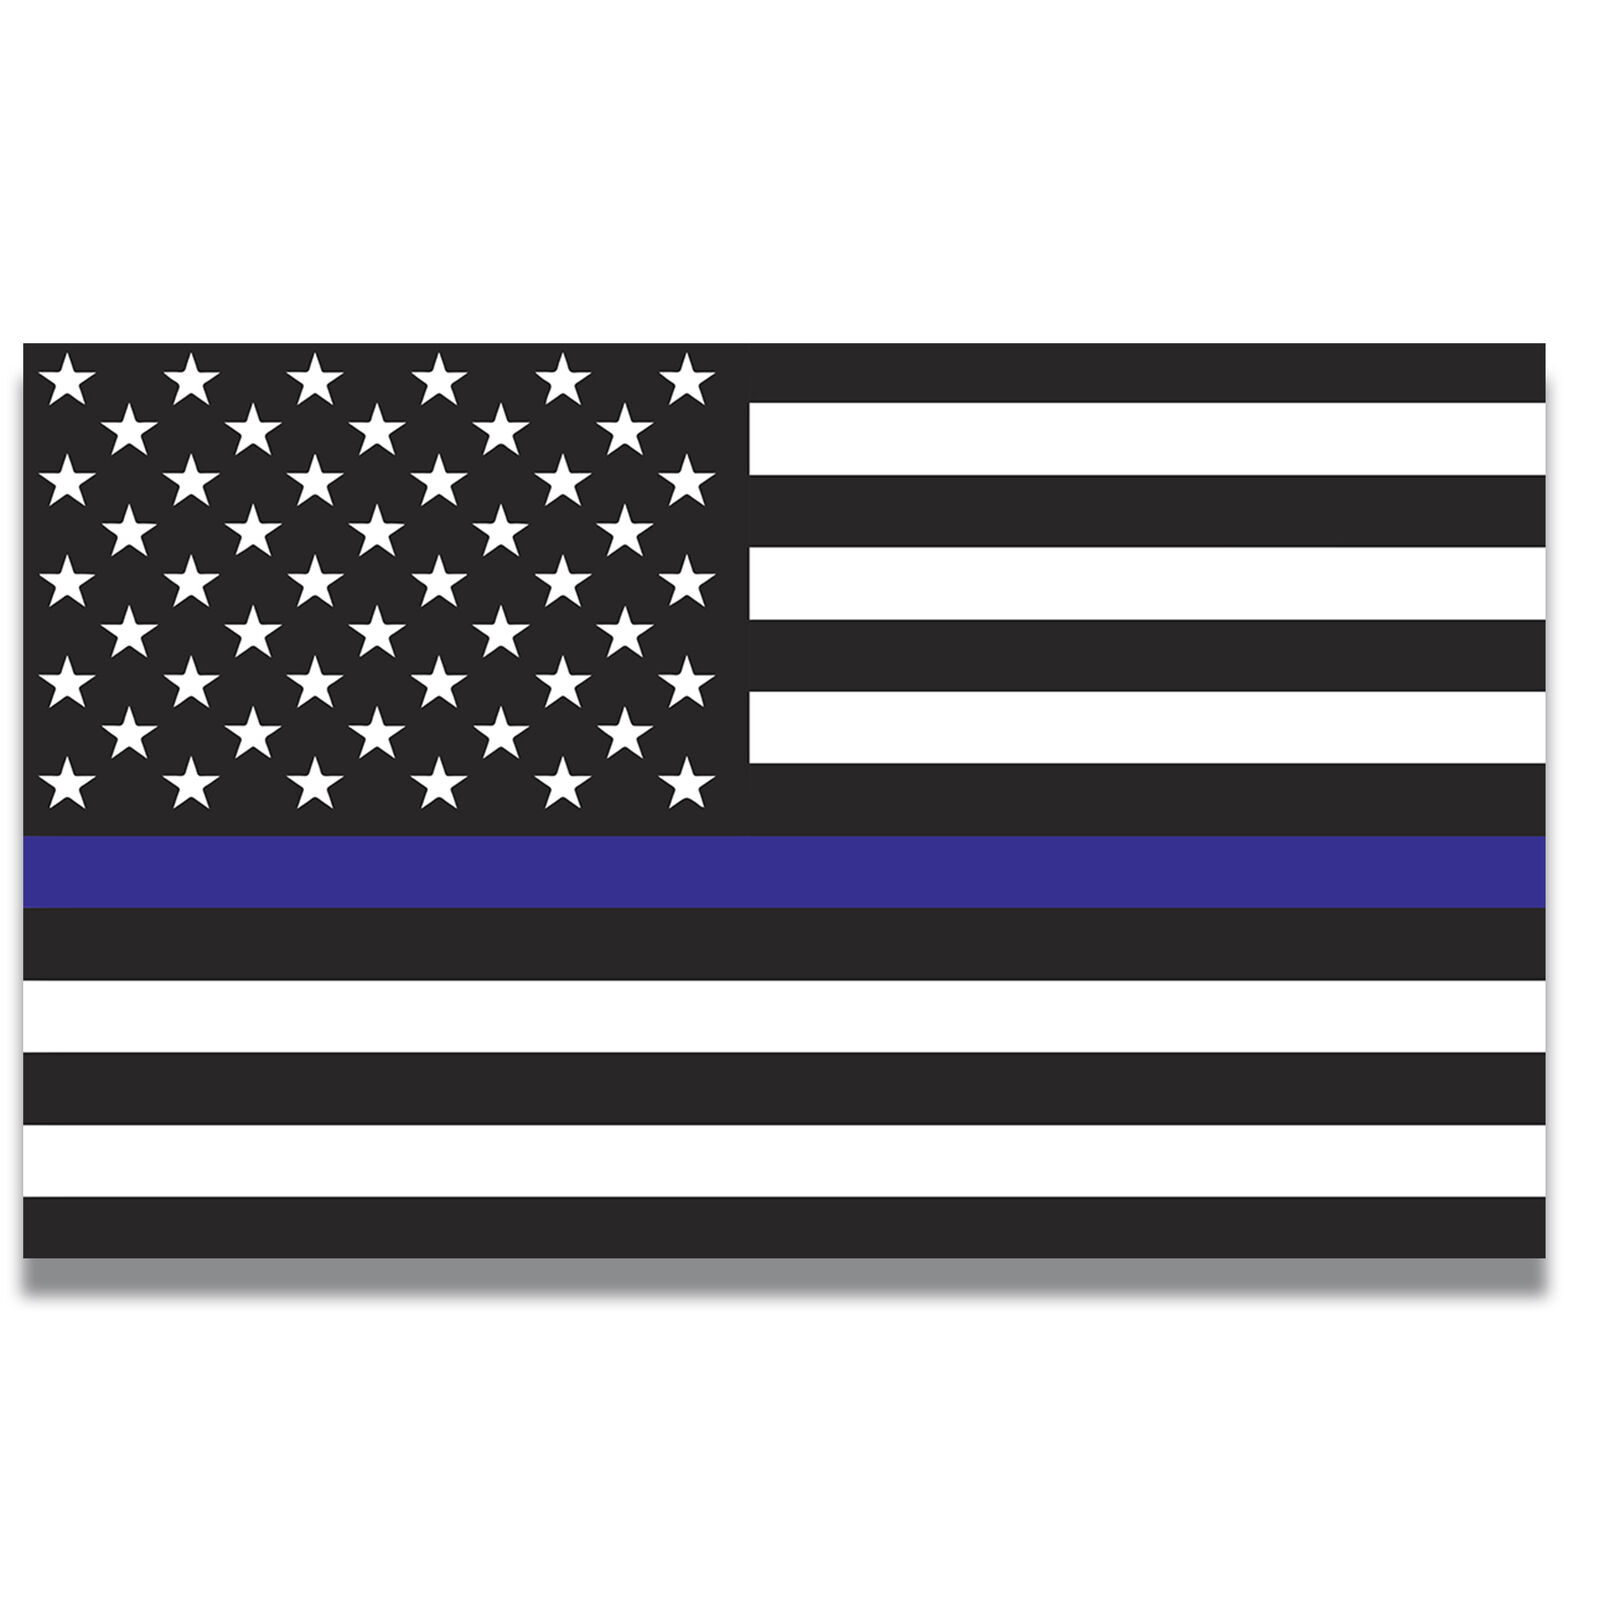 Thin Blue Line American Flag Magnet Decal, 5x8 Inches, Automotive Magnet Car